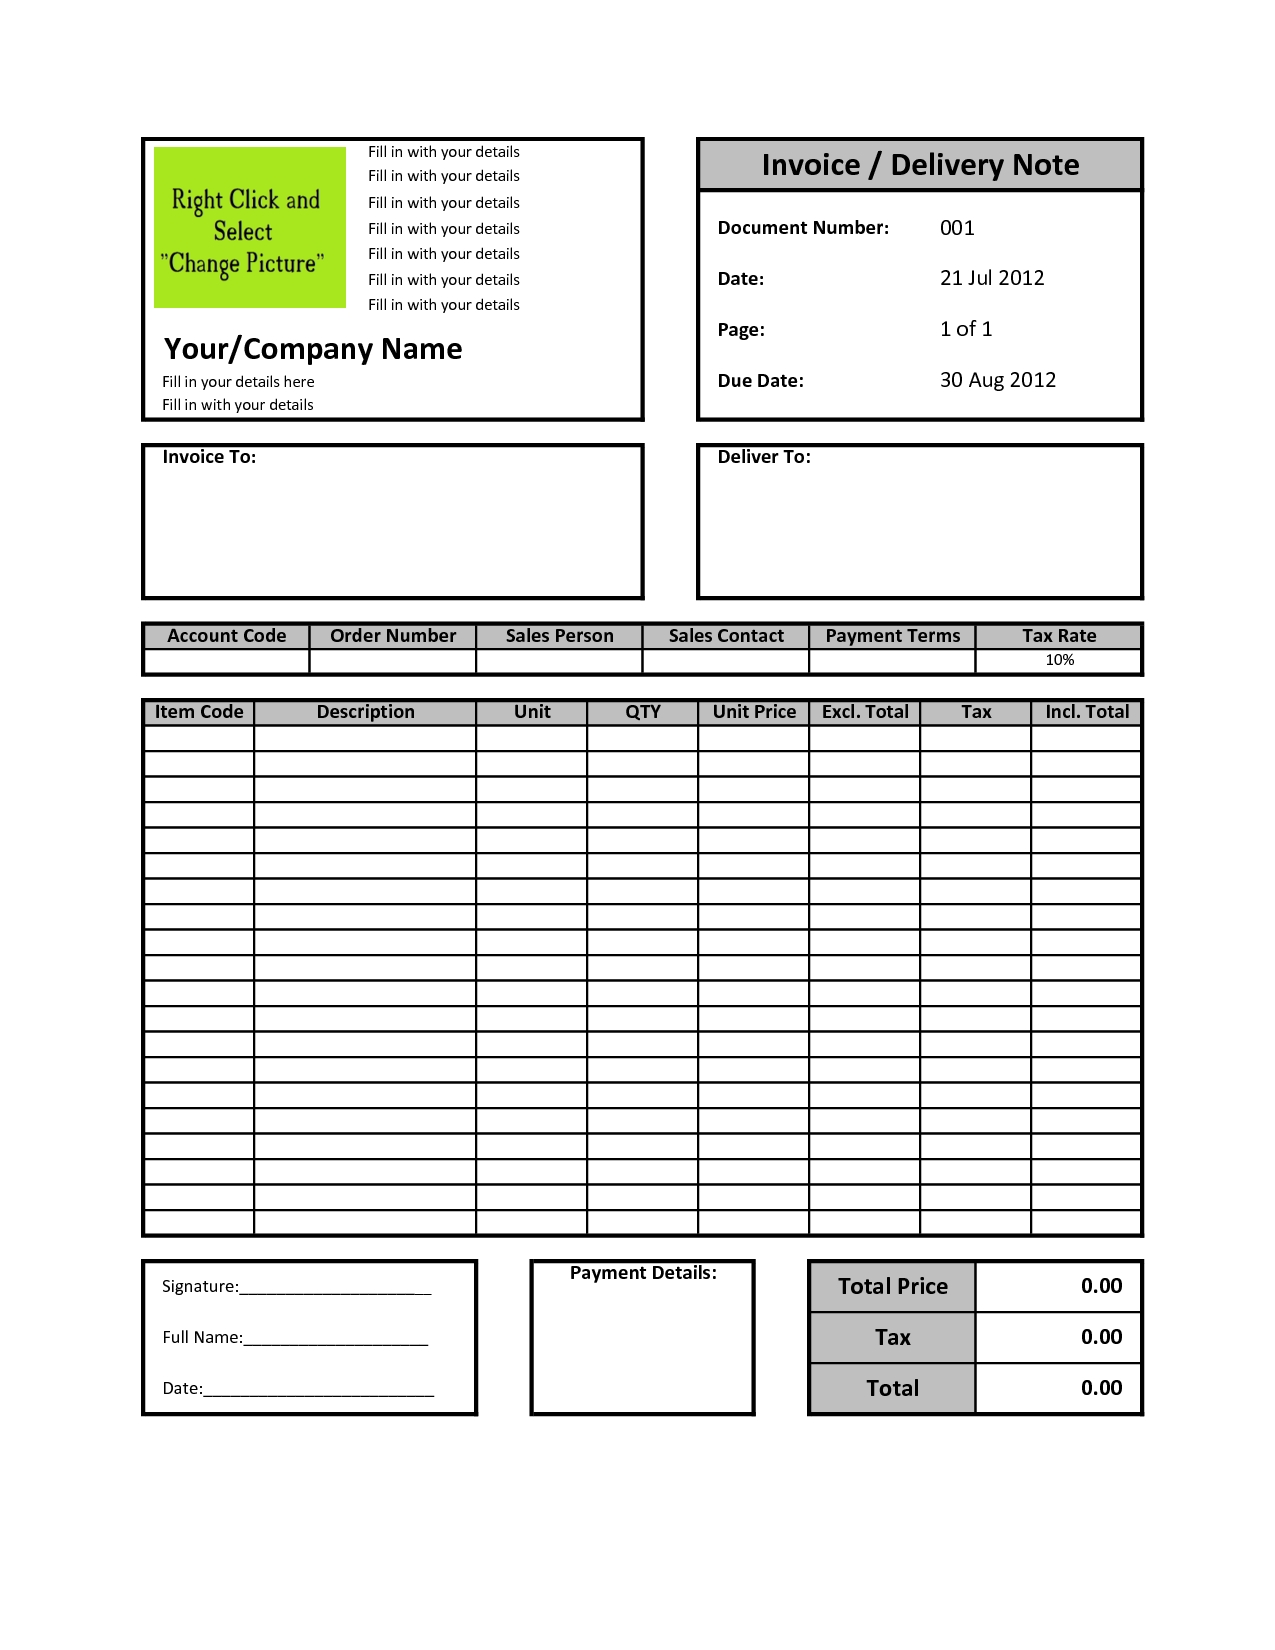 excel invoice templates invoice template excel download free sample invoice excel template